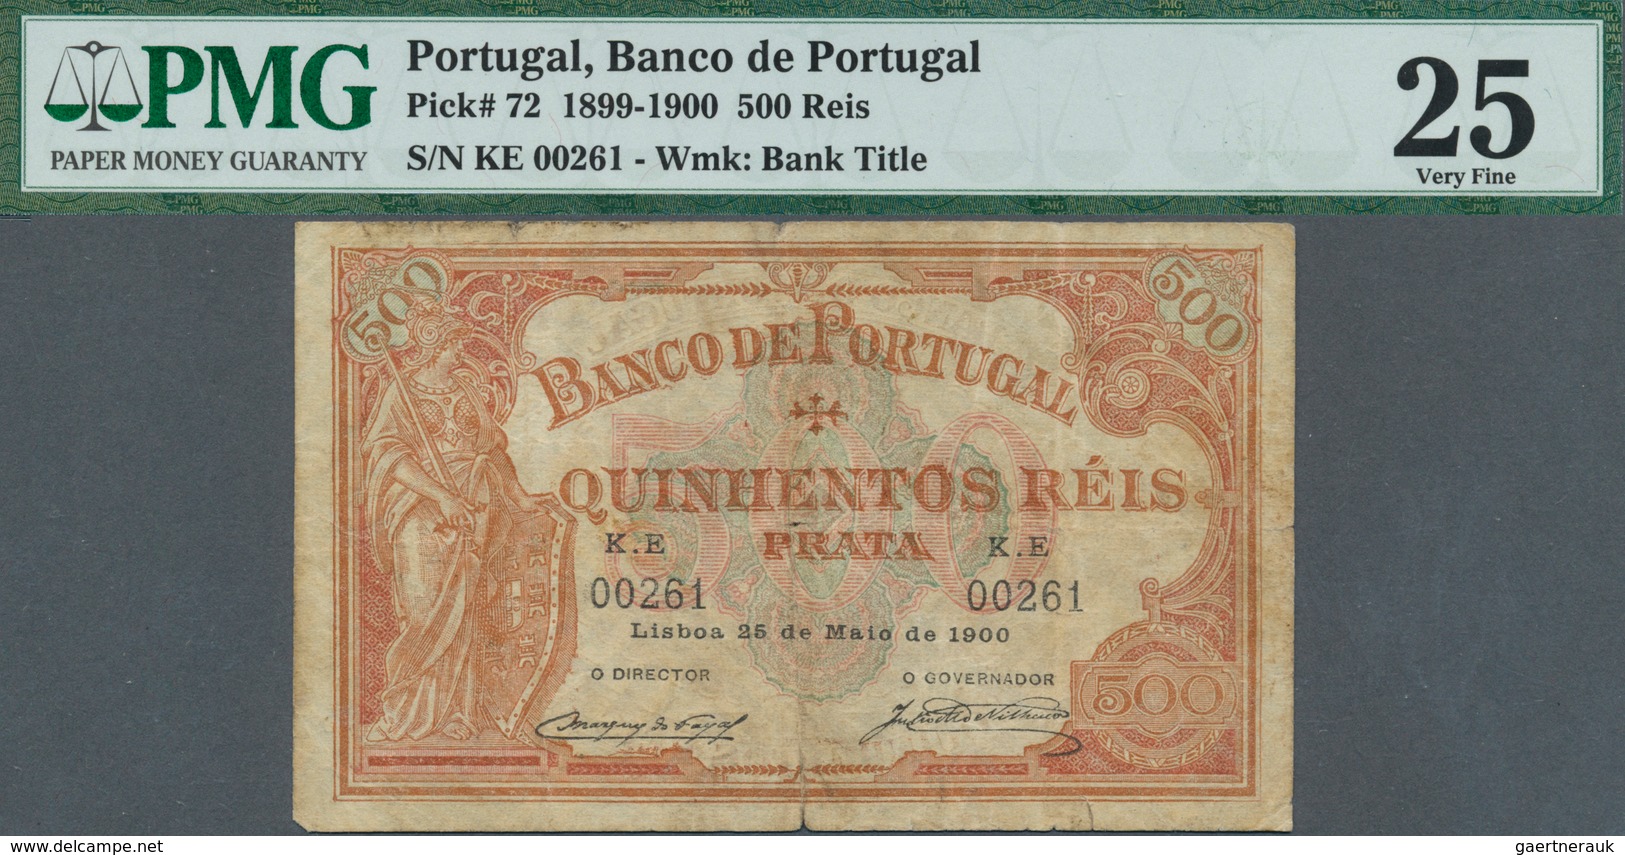 Portugal: Banco De Portugal 500 Reis 1900, P.72, Stained Paper With Several Folds, Tiny Hole At Cent - Portugal